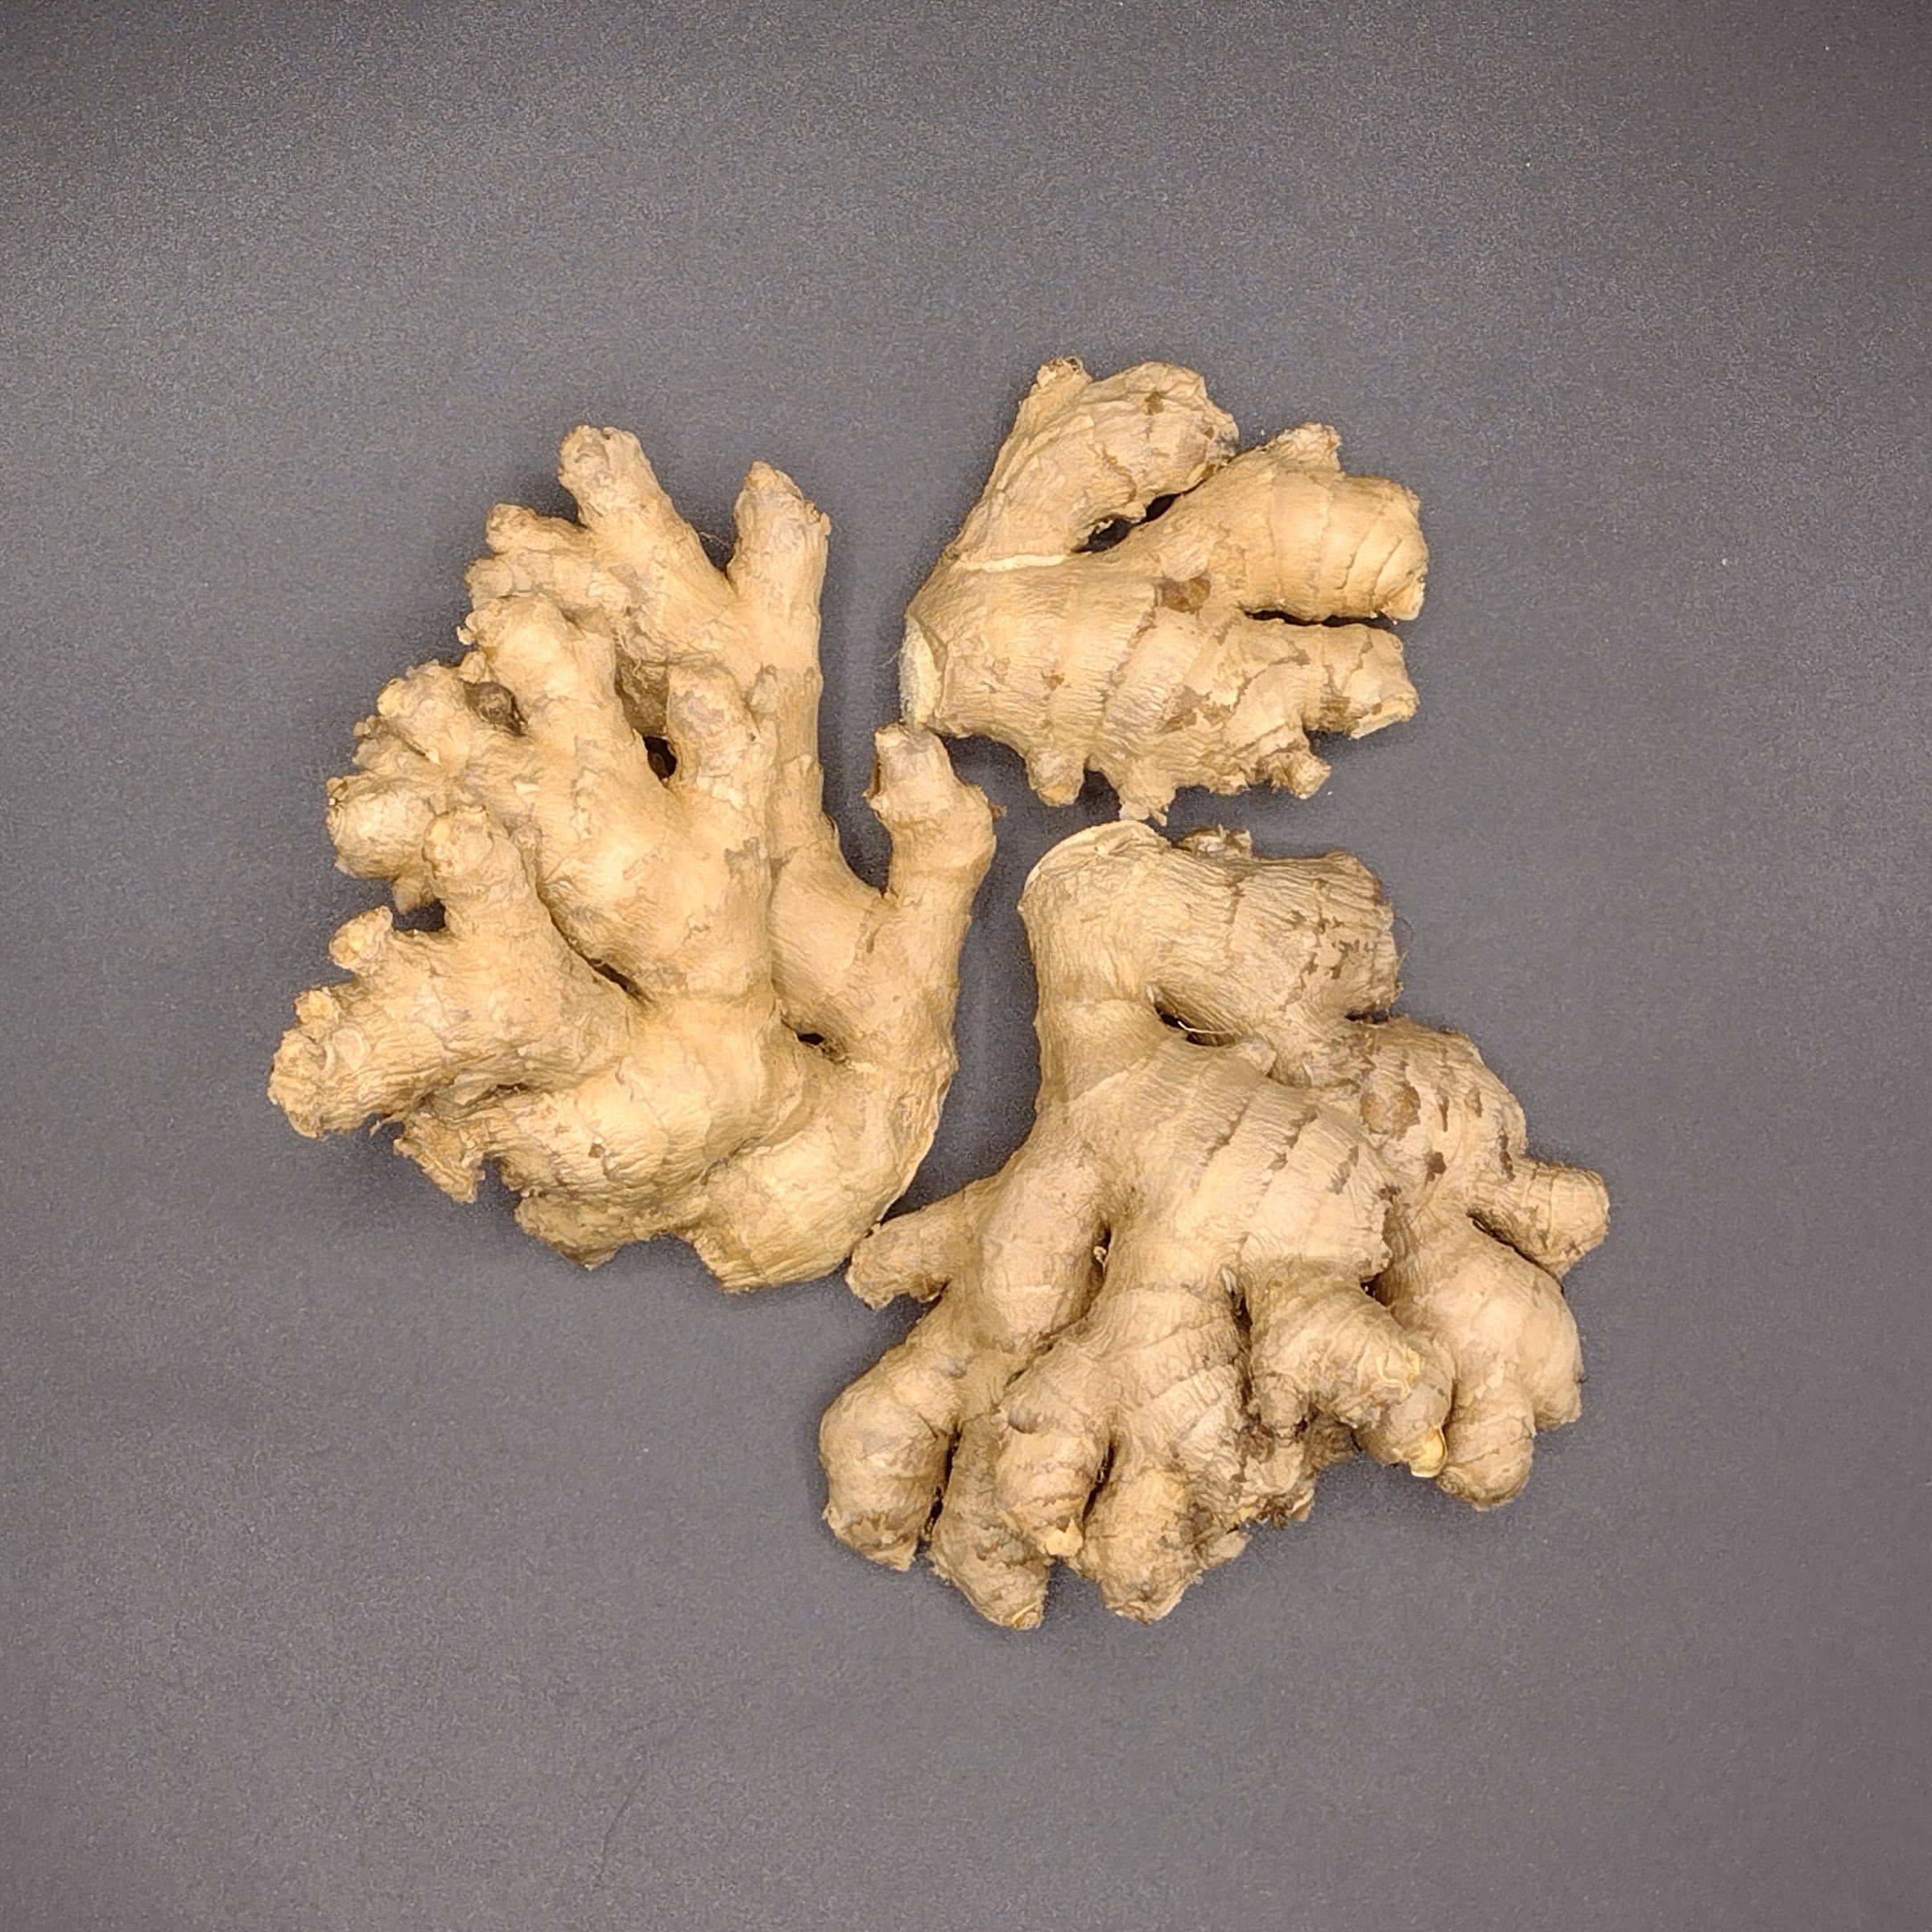 Ginger, Organic (approx 227g)